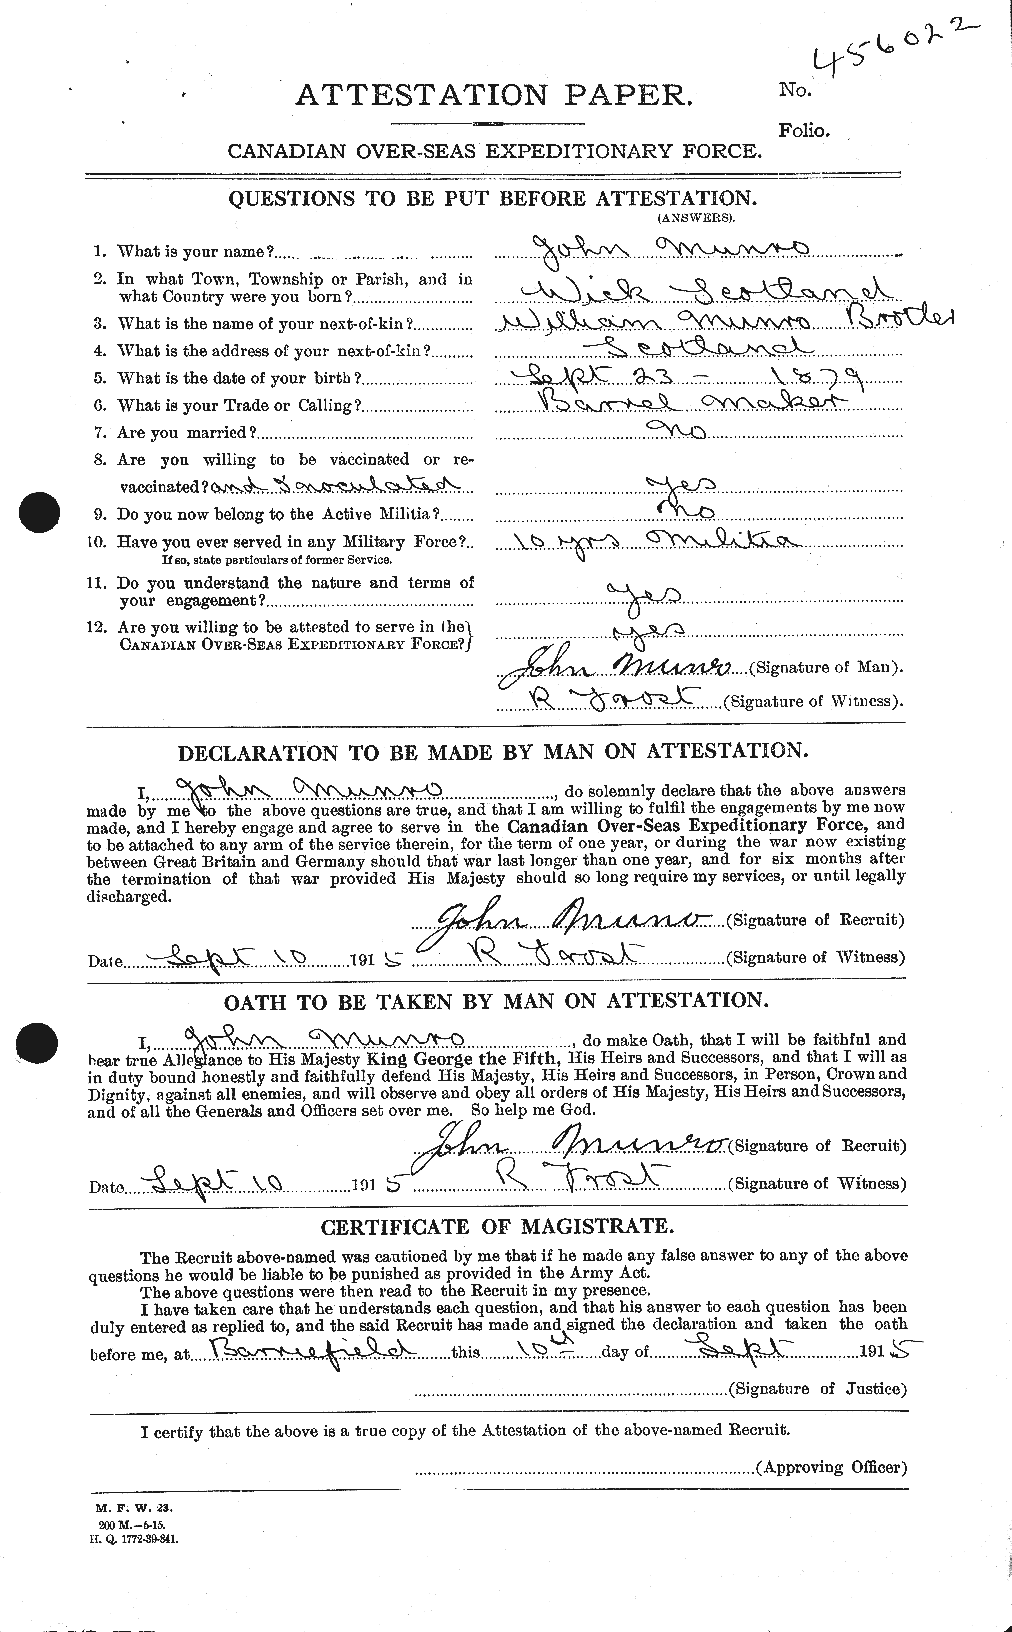 Personnel Records of the First World War - CEF 513929a